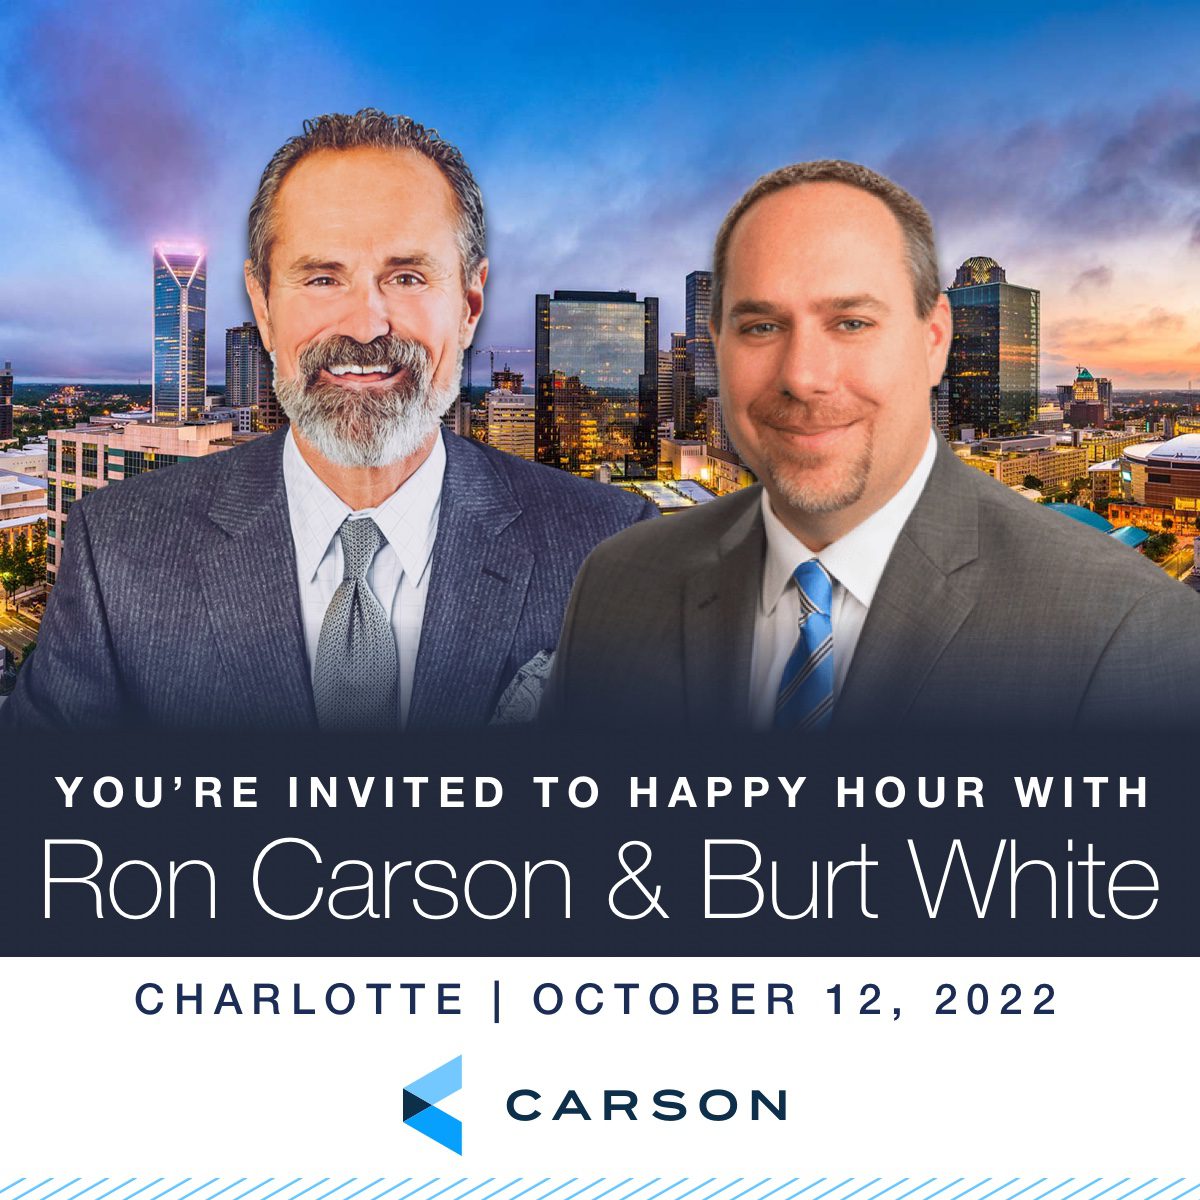 Join Ron Carson and Burt White for Happy Hour in Charlotte